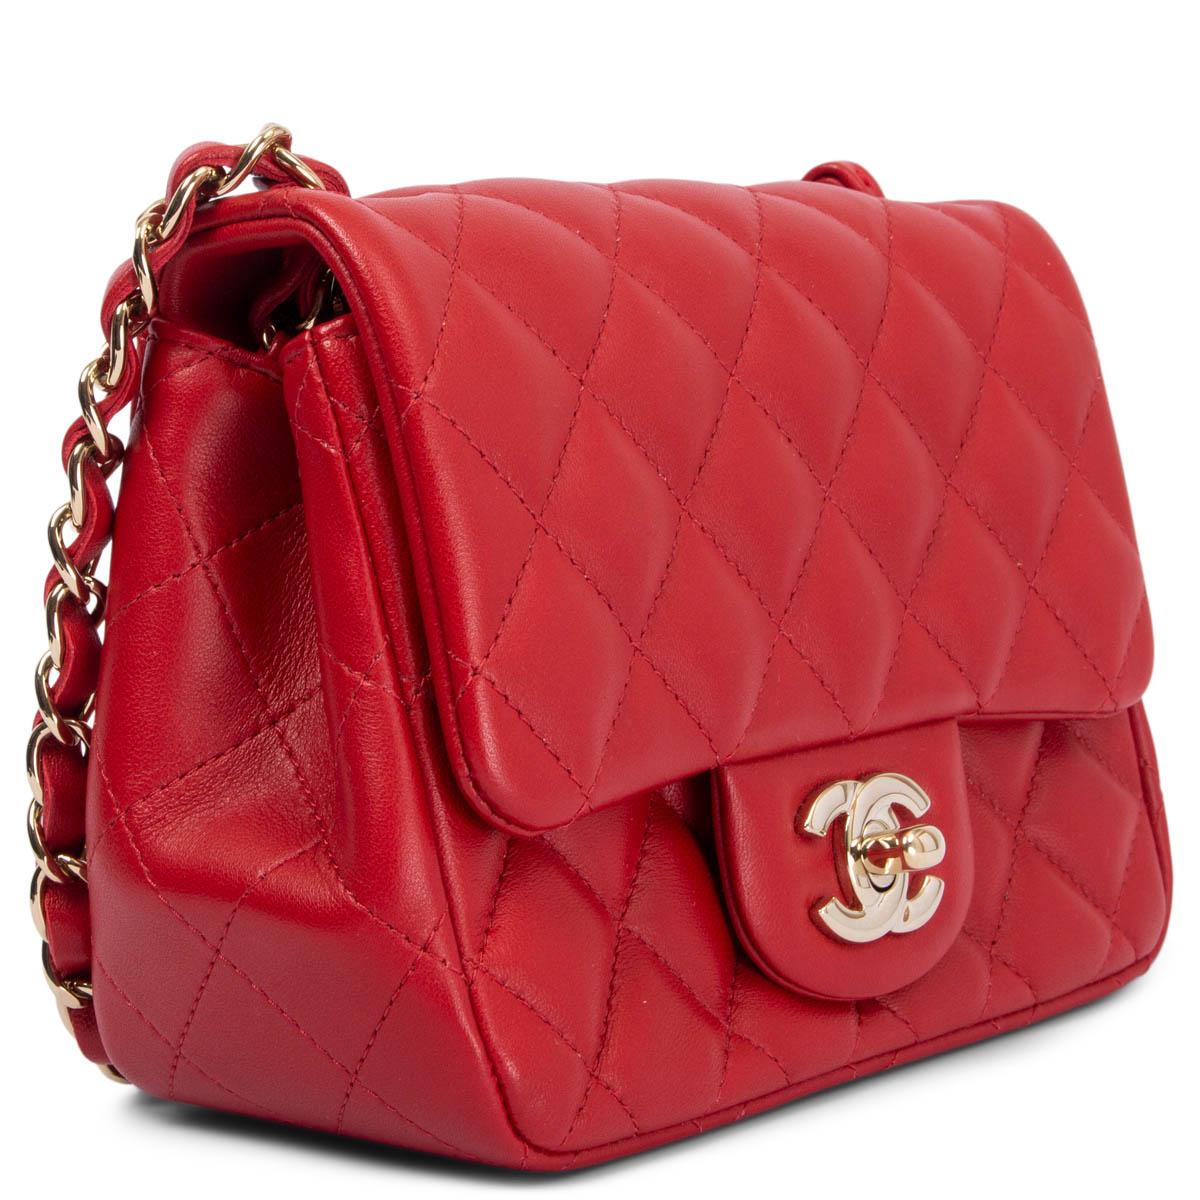 100% authentic Chanel mini square flap shoulder bag in red quilted lambskin leather with silver-tone hardware. Open pocket on the outside back. Closes with classic double CC turn-lock. Lined in leather with an open and zipper pocket against the